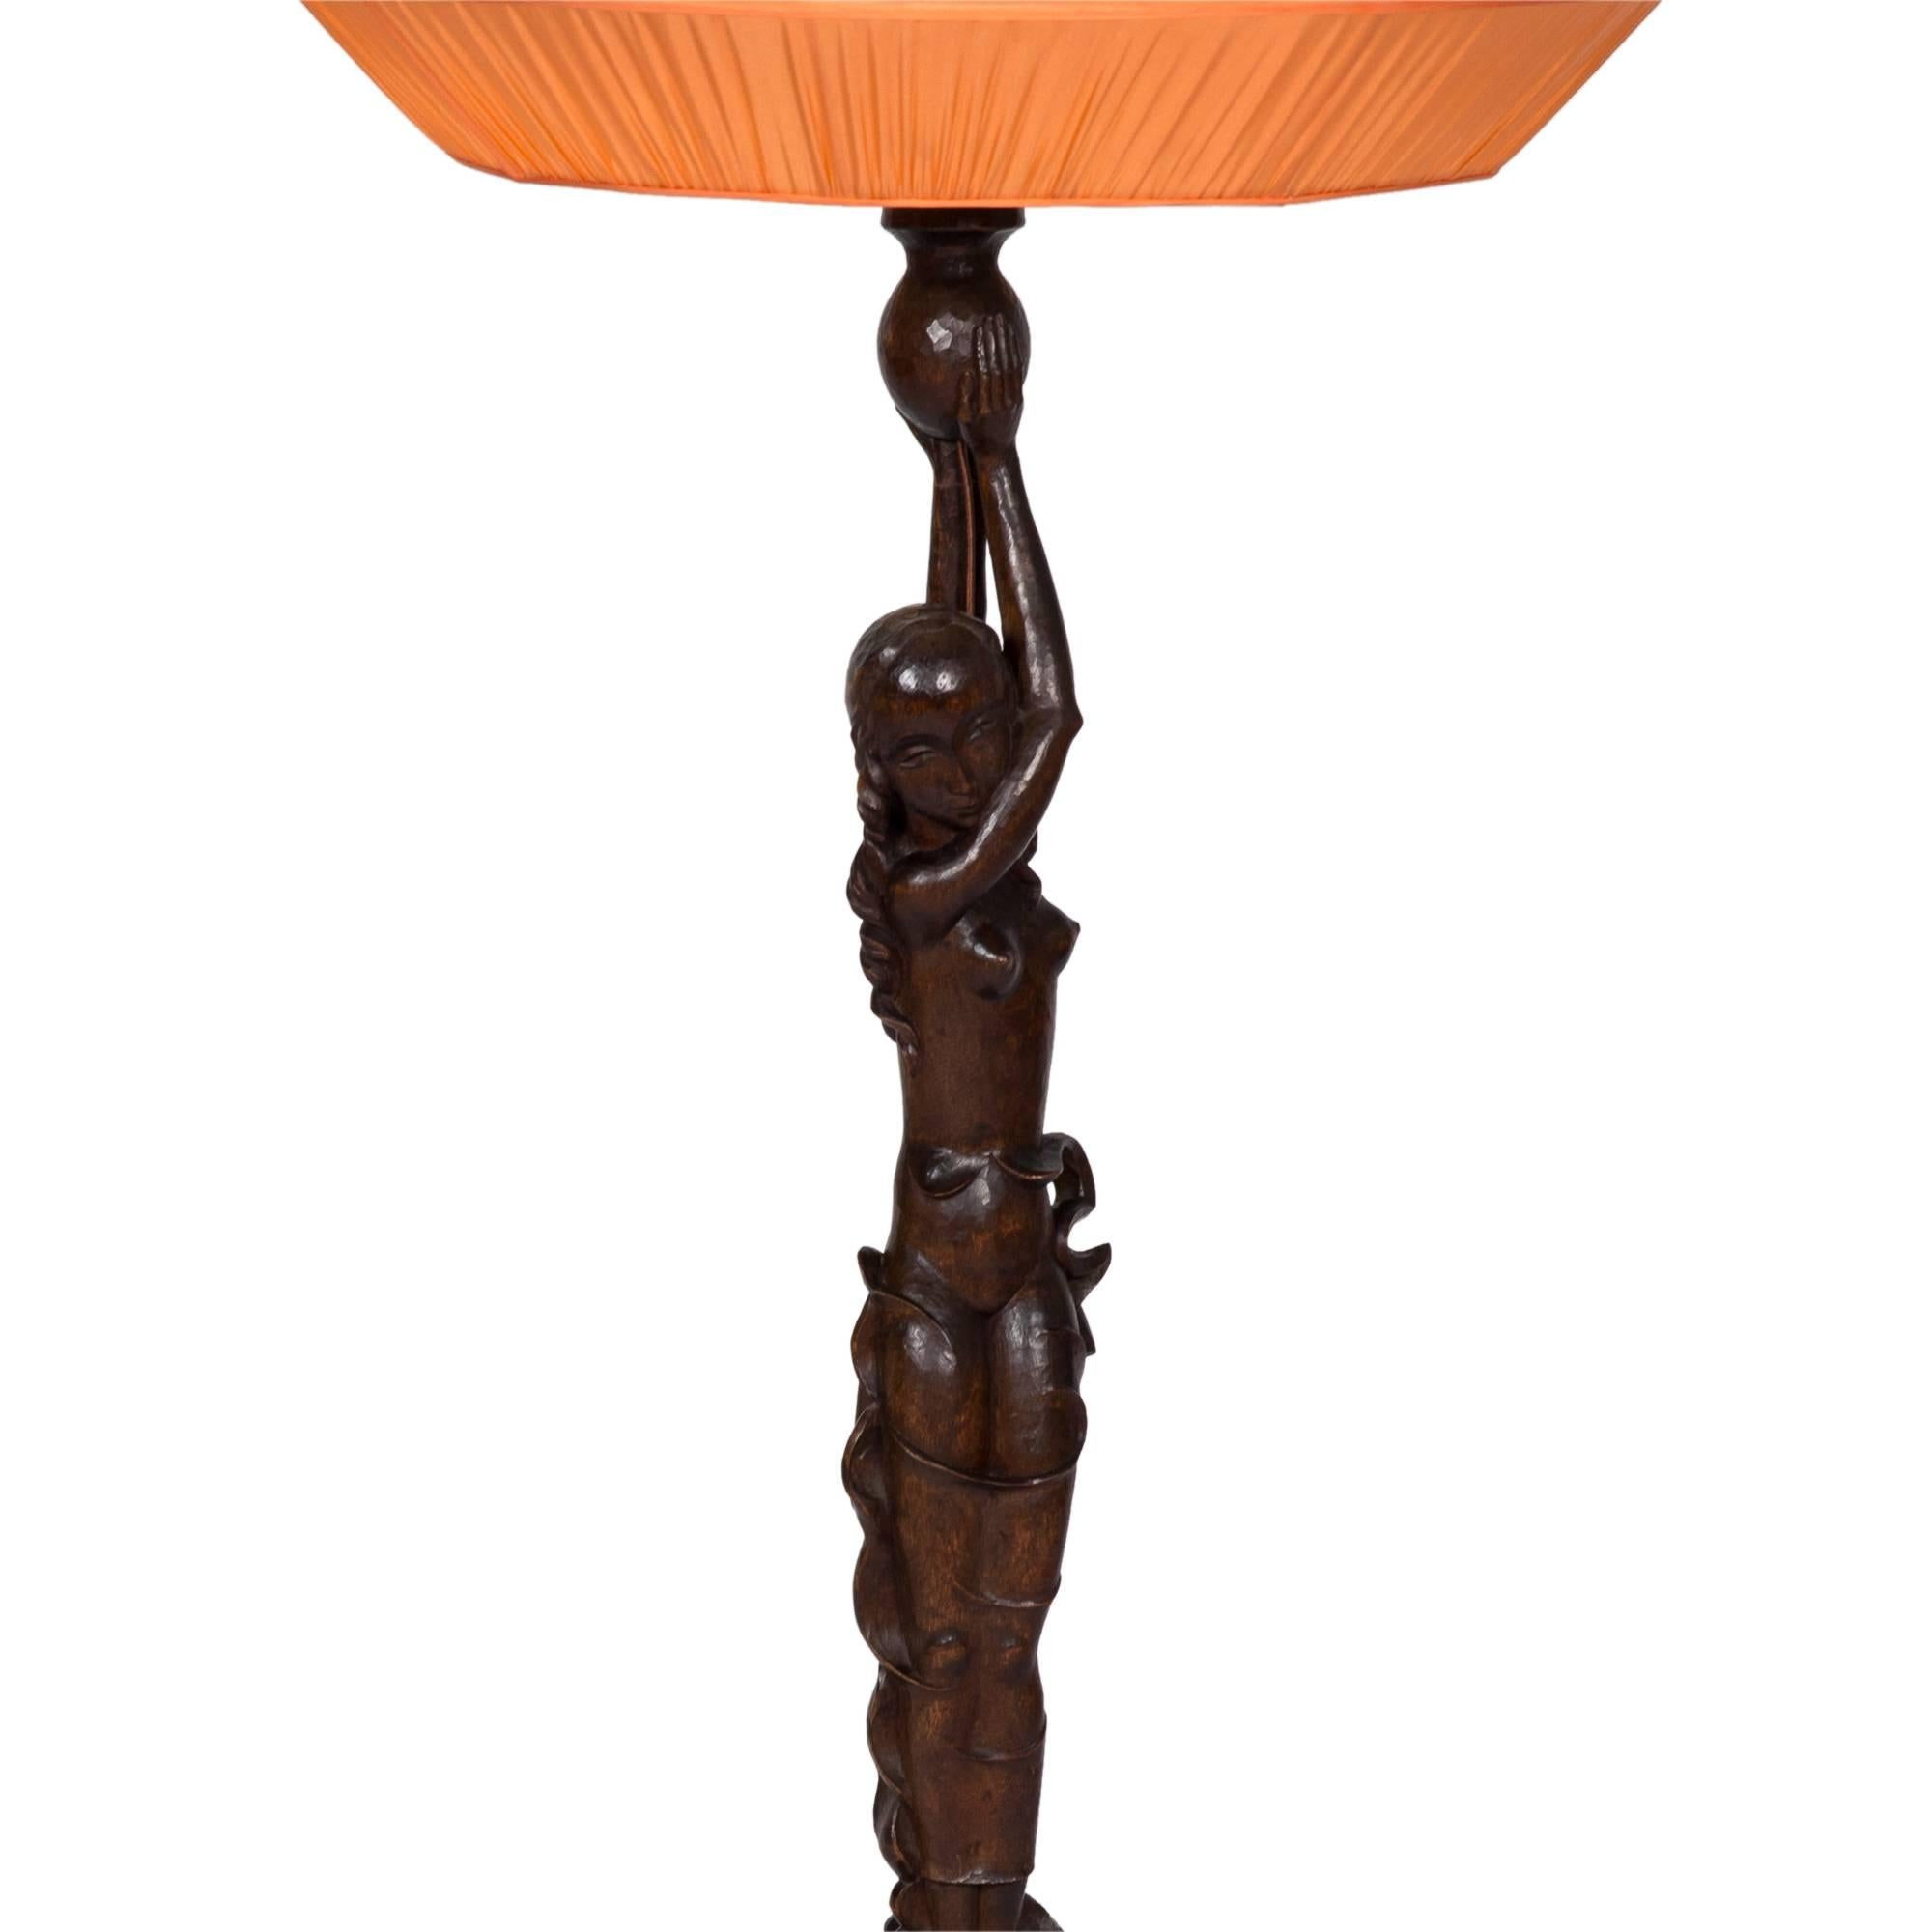 Carved-wood table lamp with three-bulb socket, in the shape of woman with custom, coral-color pleated silk shade. German, circa 1920. Measures: 45 in. overall height, 13 in. base diameter; 10 in. shade height, 20 in. shade diameter at widest point.